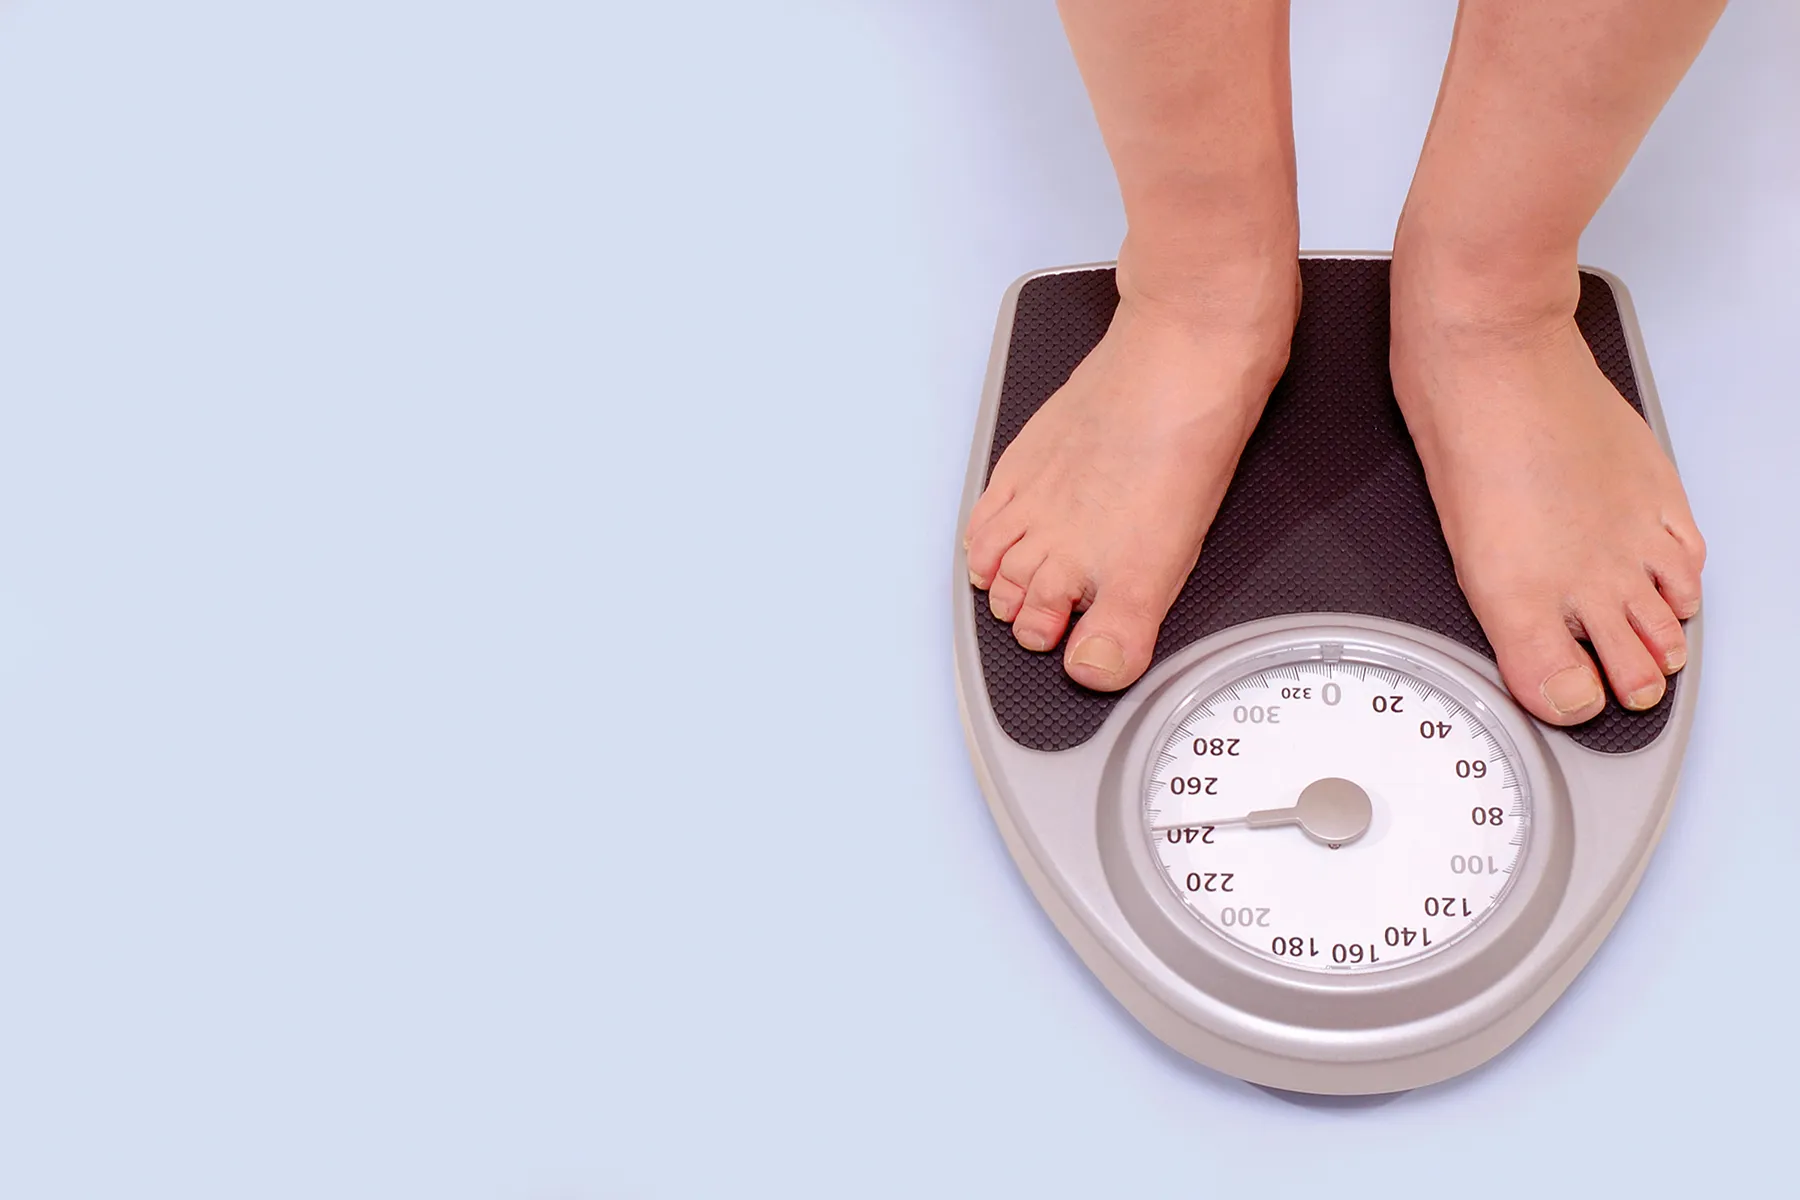 More Americans Trying to Lose Weight, But Few Succeeding - WebMD